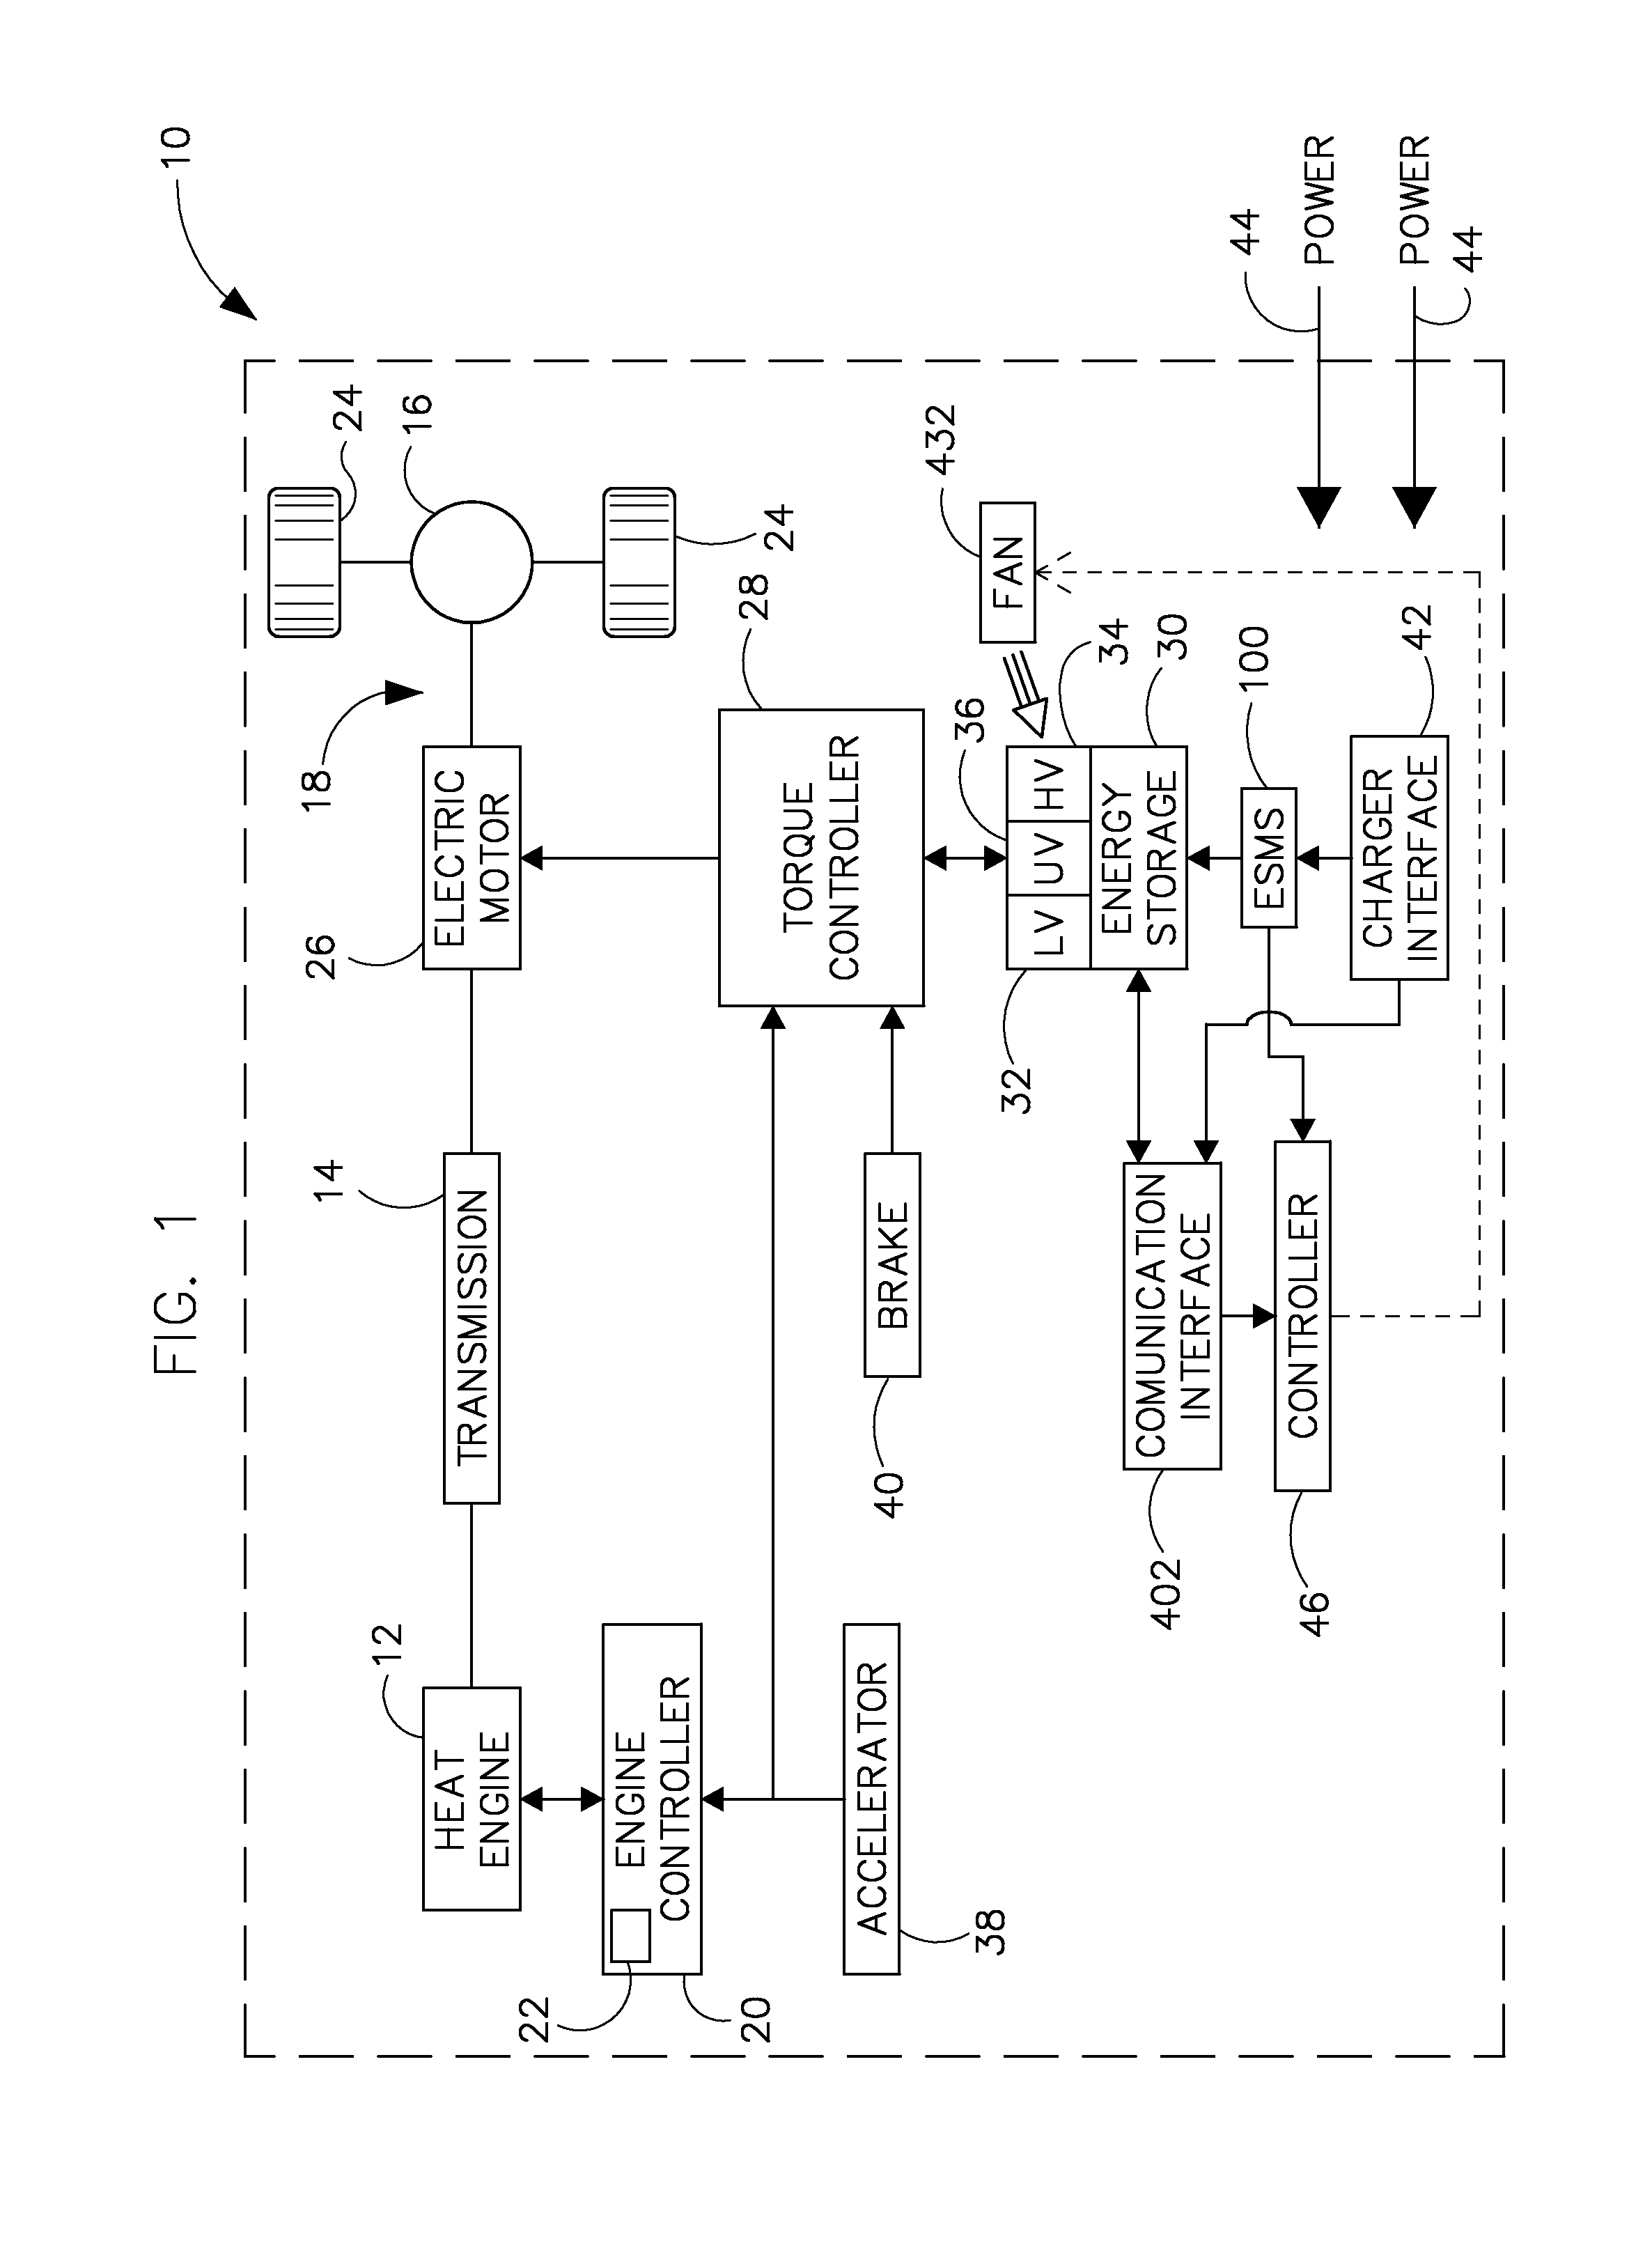 Method and apparatus for charging multiple energy storage devices